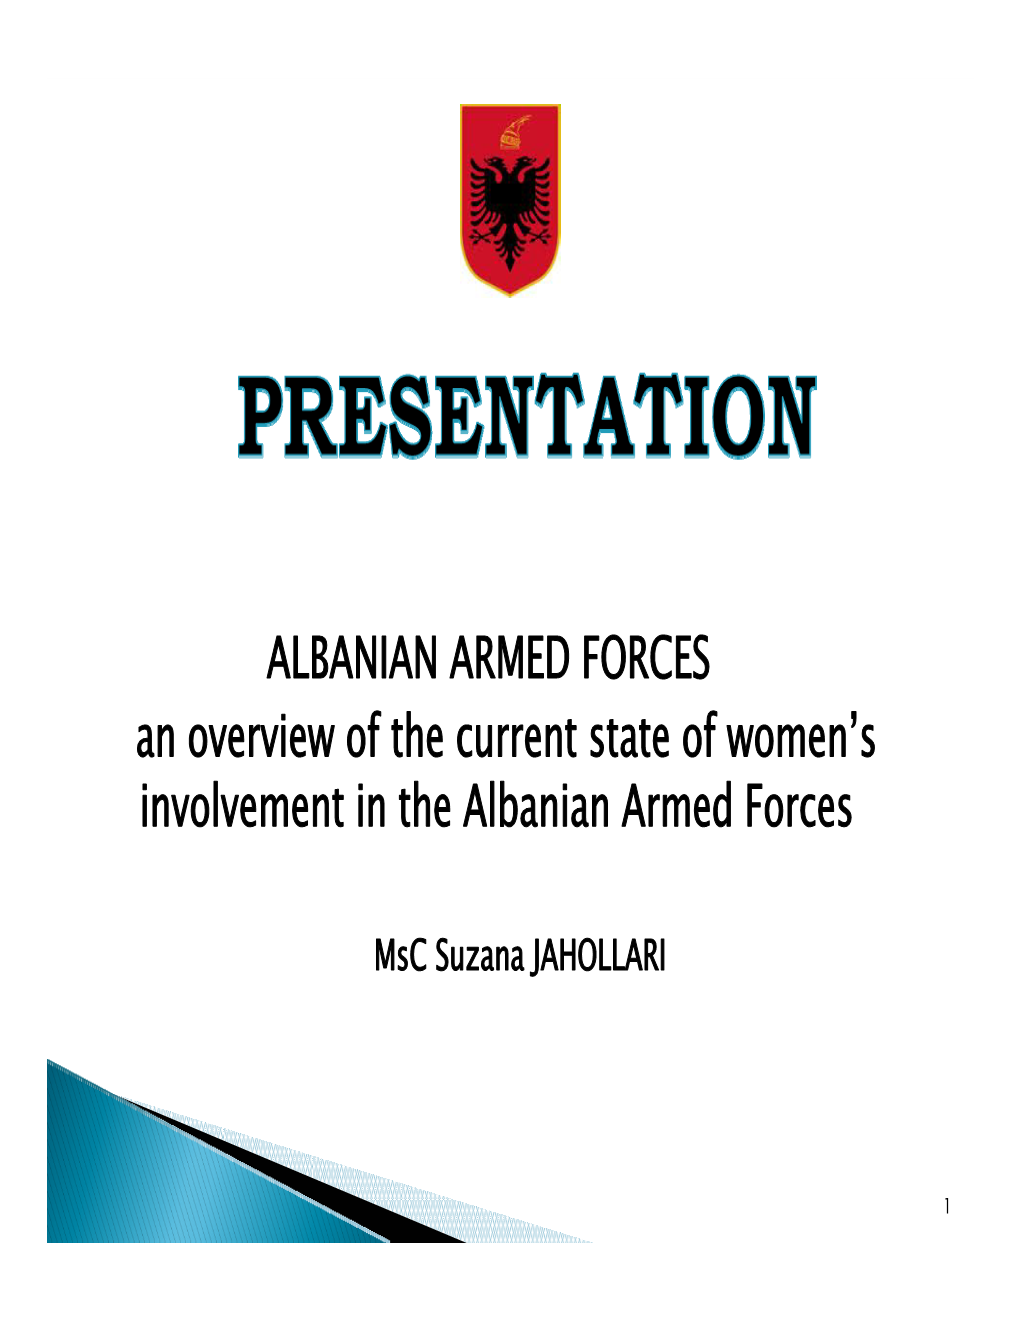 ALBANIAN ARMED FORCES an Overview of the Current State of Women’S Involvement in the Albanian Armed Forces